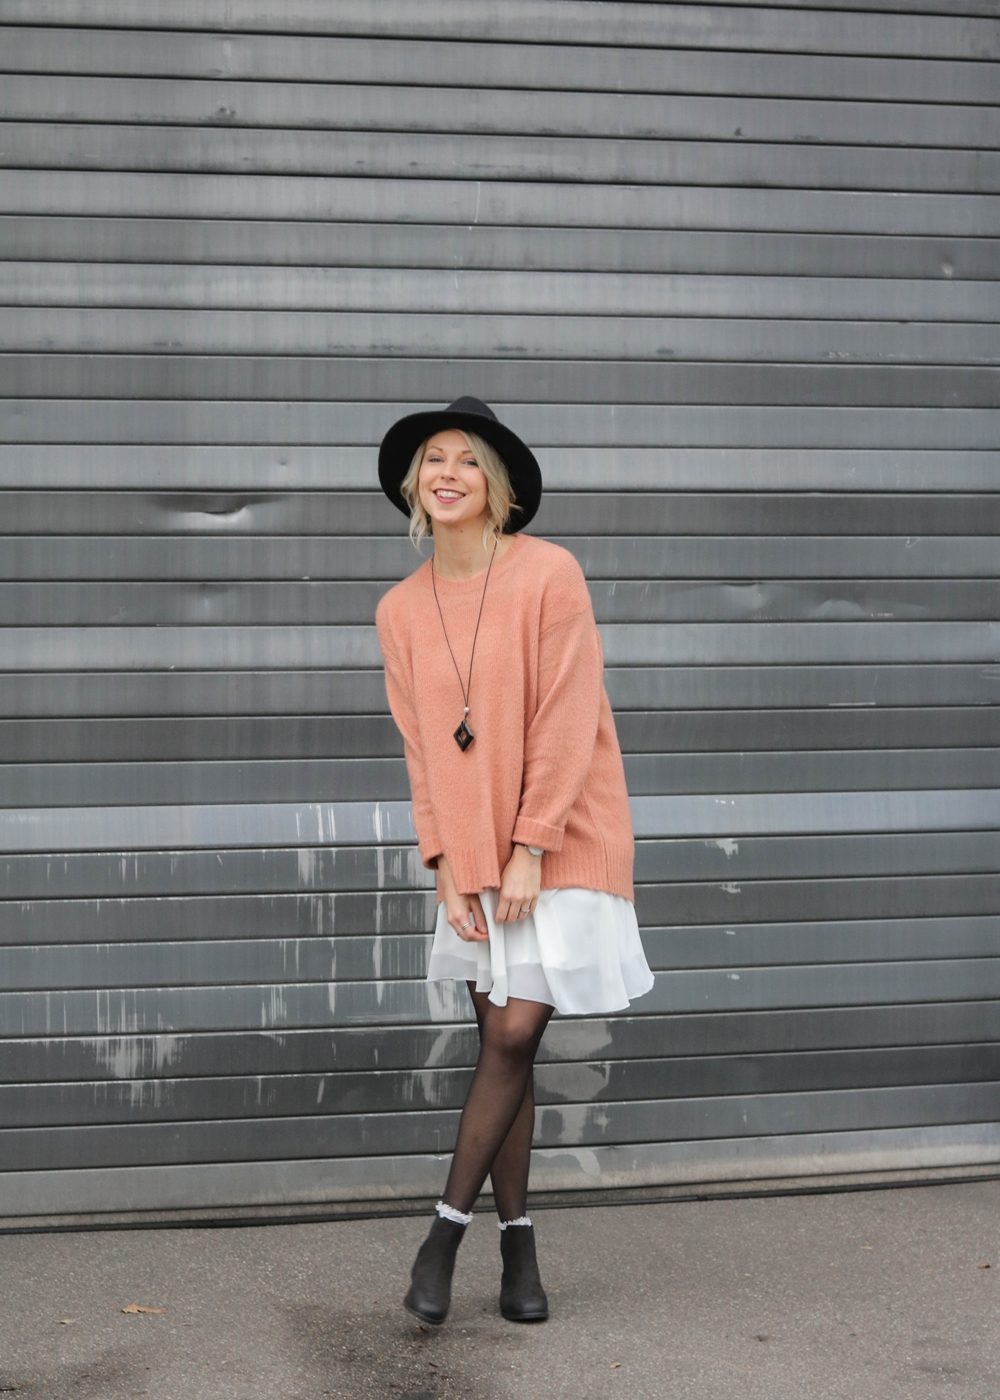 fashionblogger-outfit-ankle-boots-shoemates-rosa-strickpullover-zara-lagenlook-11